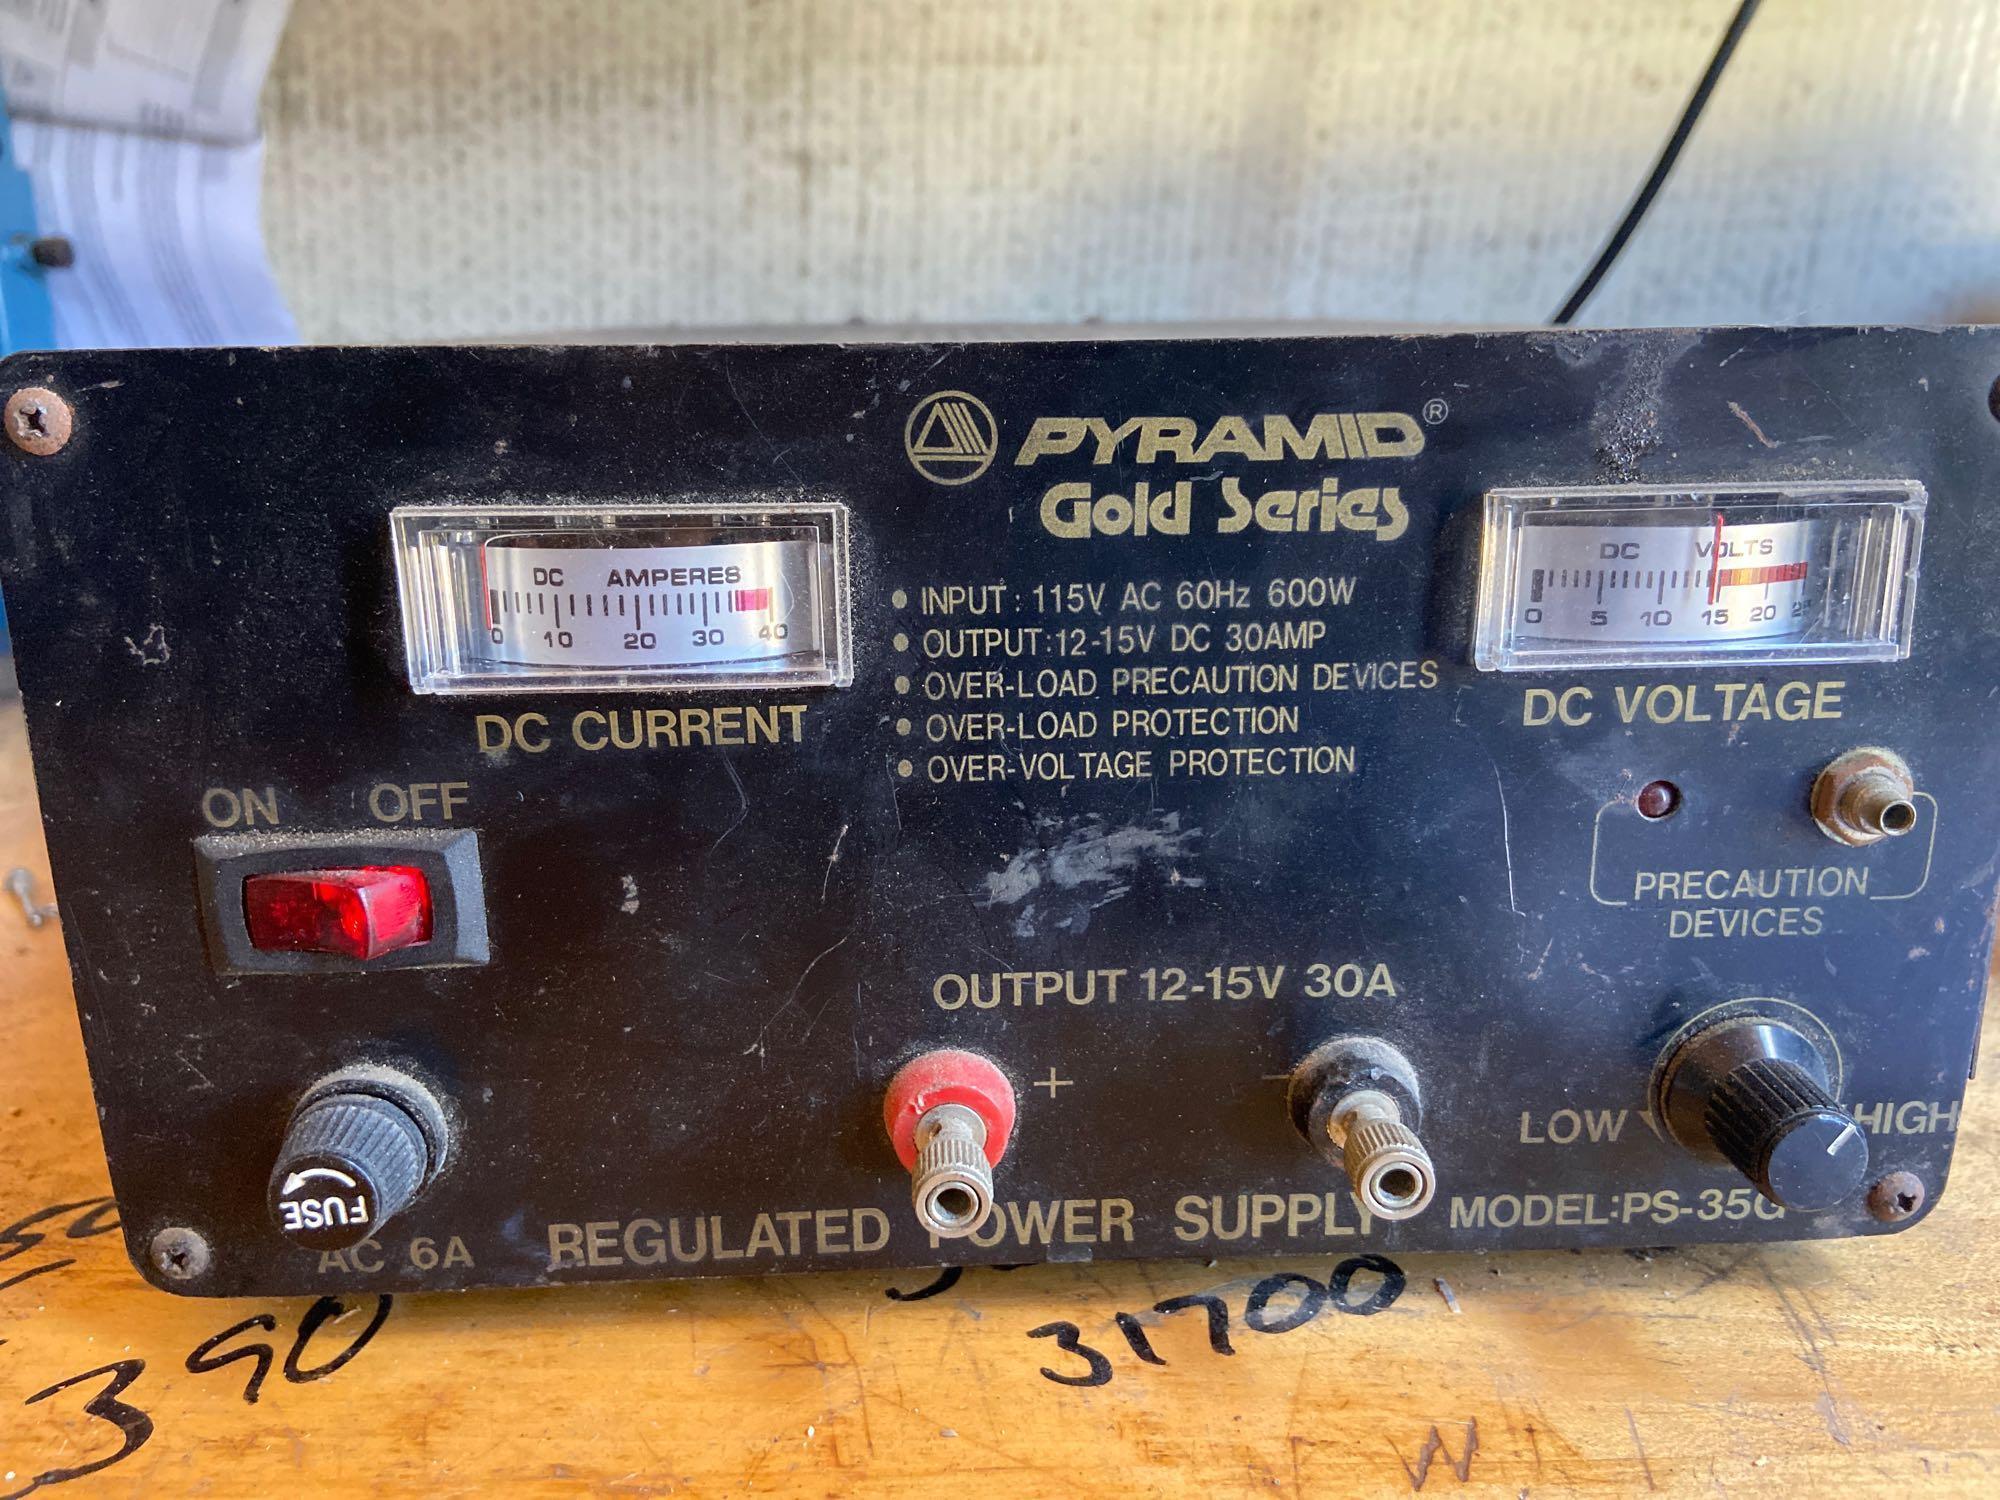 Pyramid gold series regulated power supply TR5141